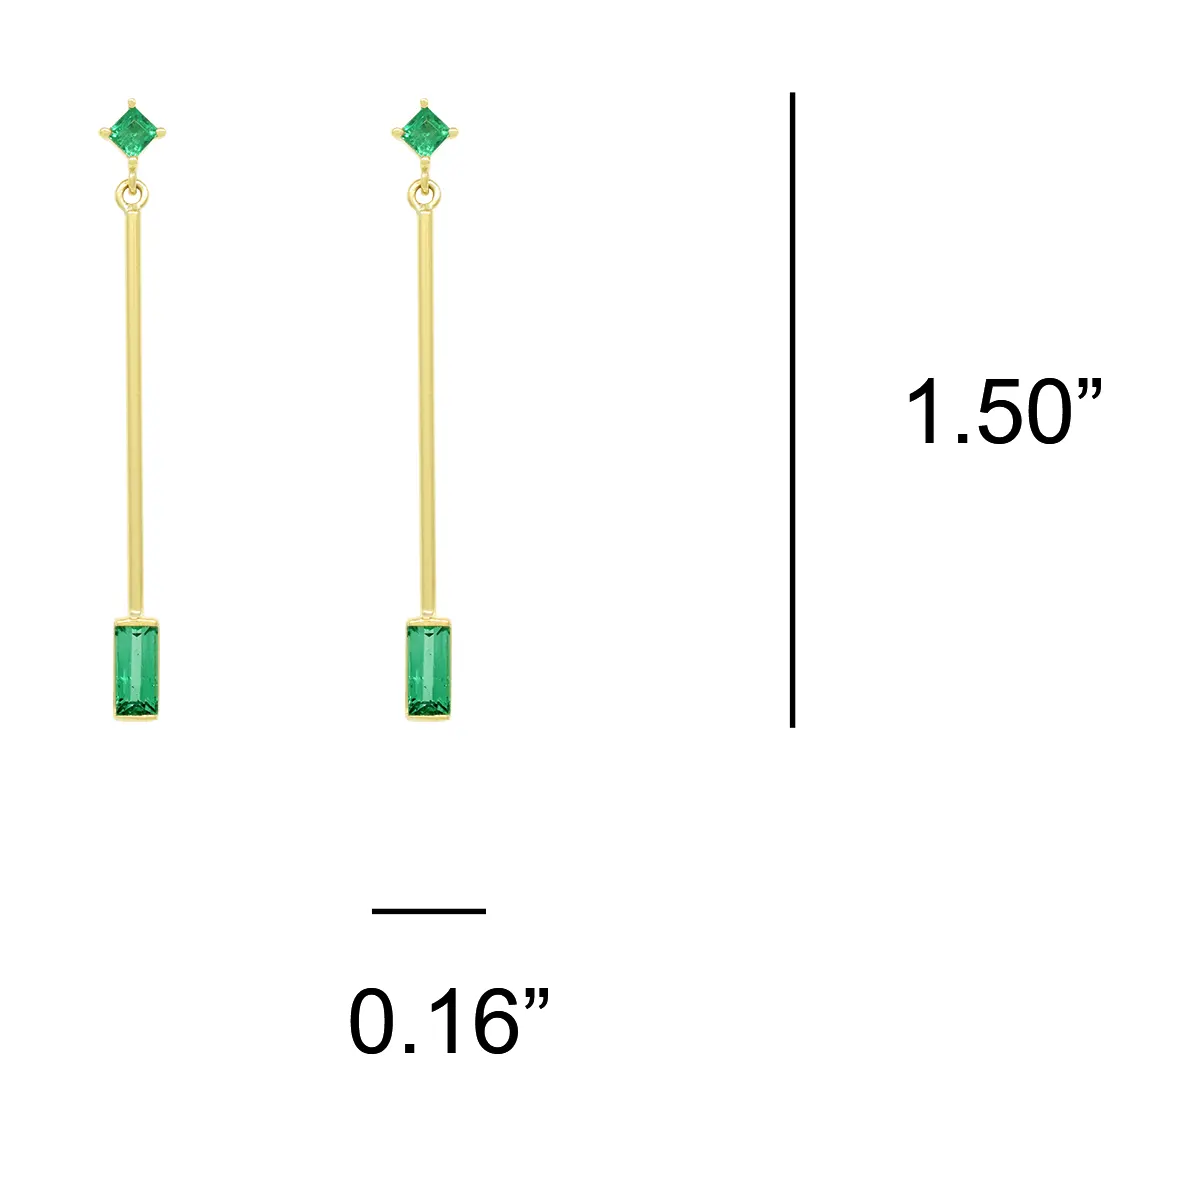 The dimensions of these green and yellow emerald earrings are 1.50 inches high by 0.16 inches wide